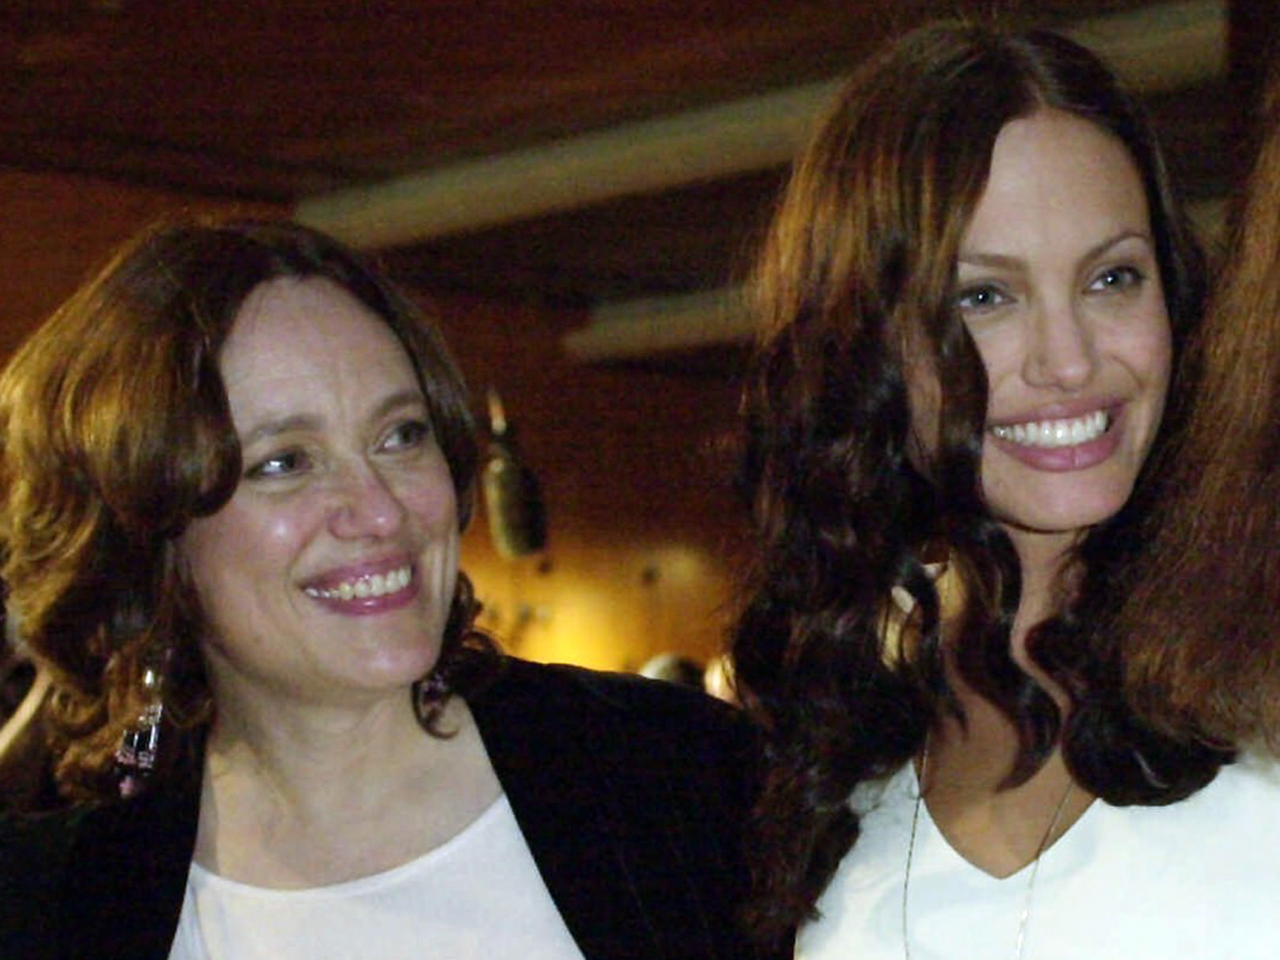 The Angelina effect: Jolie's surgery sparks surge in cancer tests1280 x 960